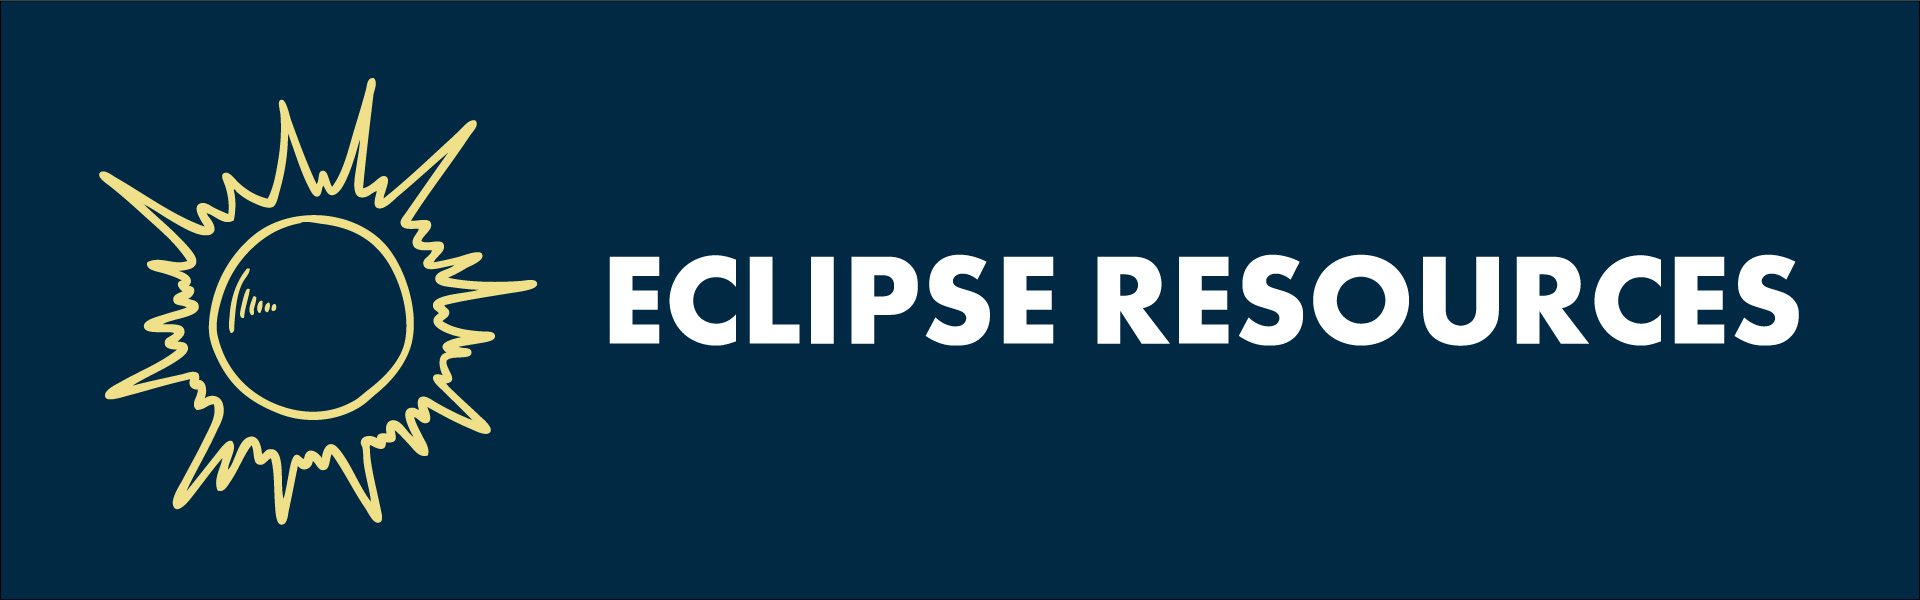 Navy blue graphic with white text that reads ECLIPSE RESOURCES alongside a yellow drawing of the sun.